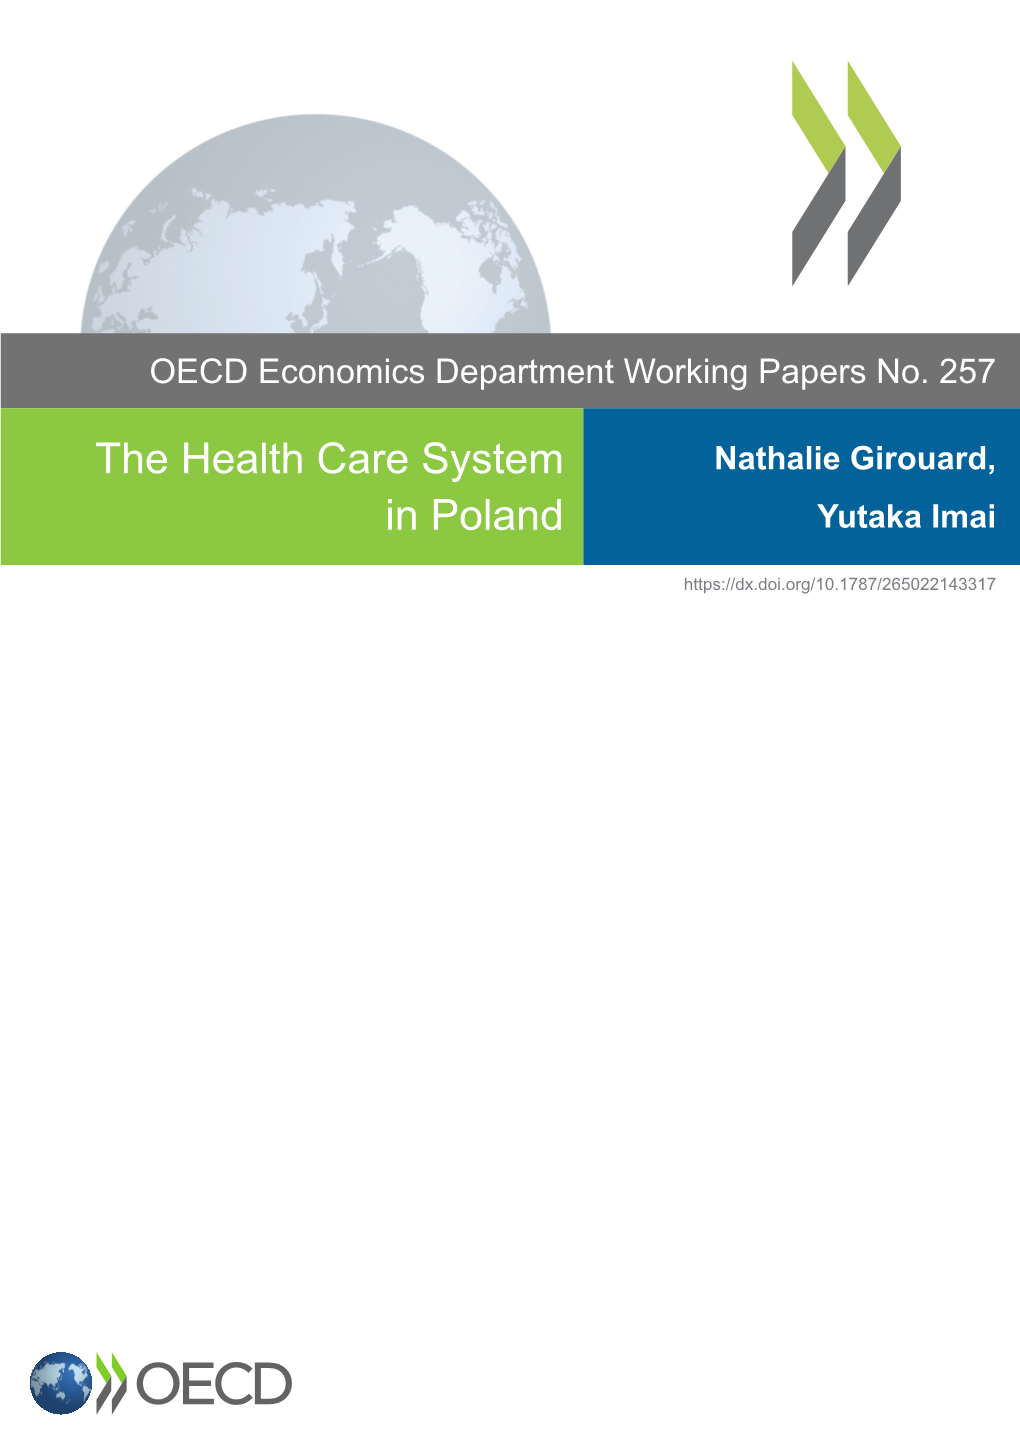 The Health Care System in Poland